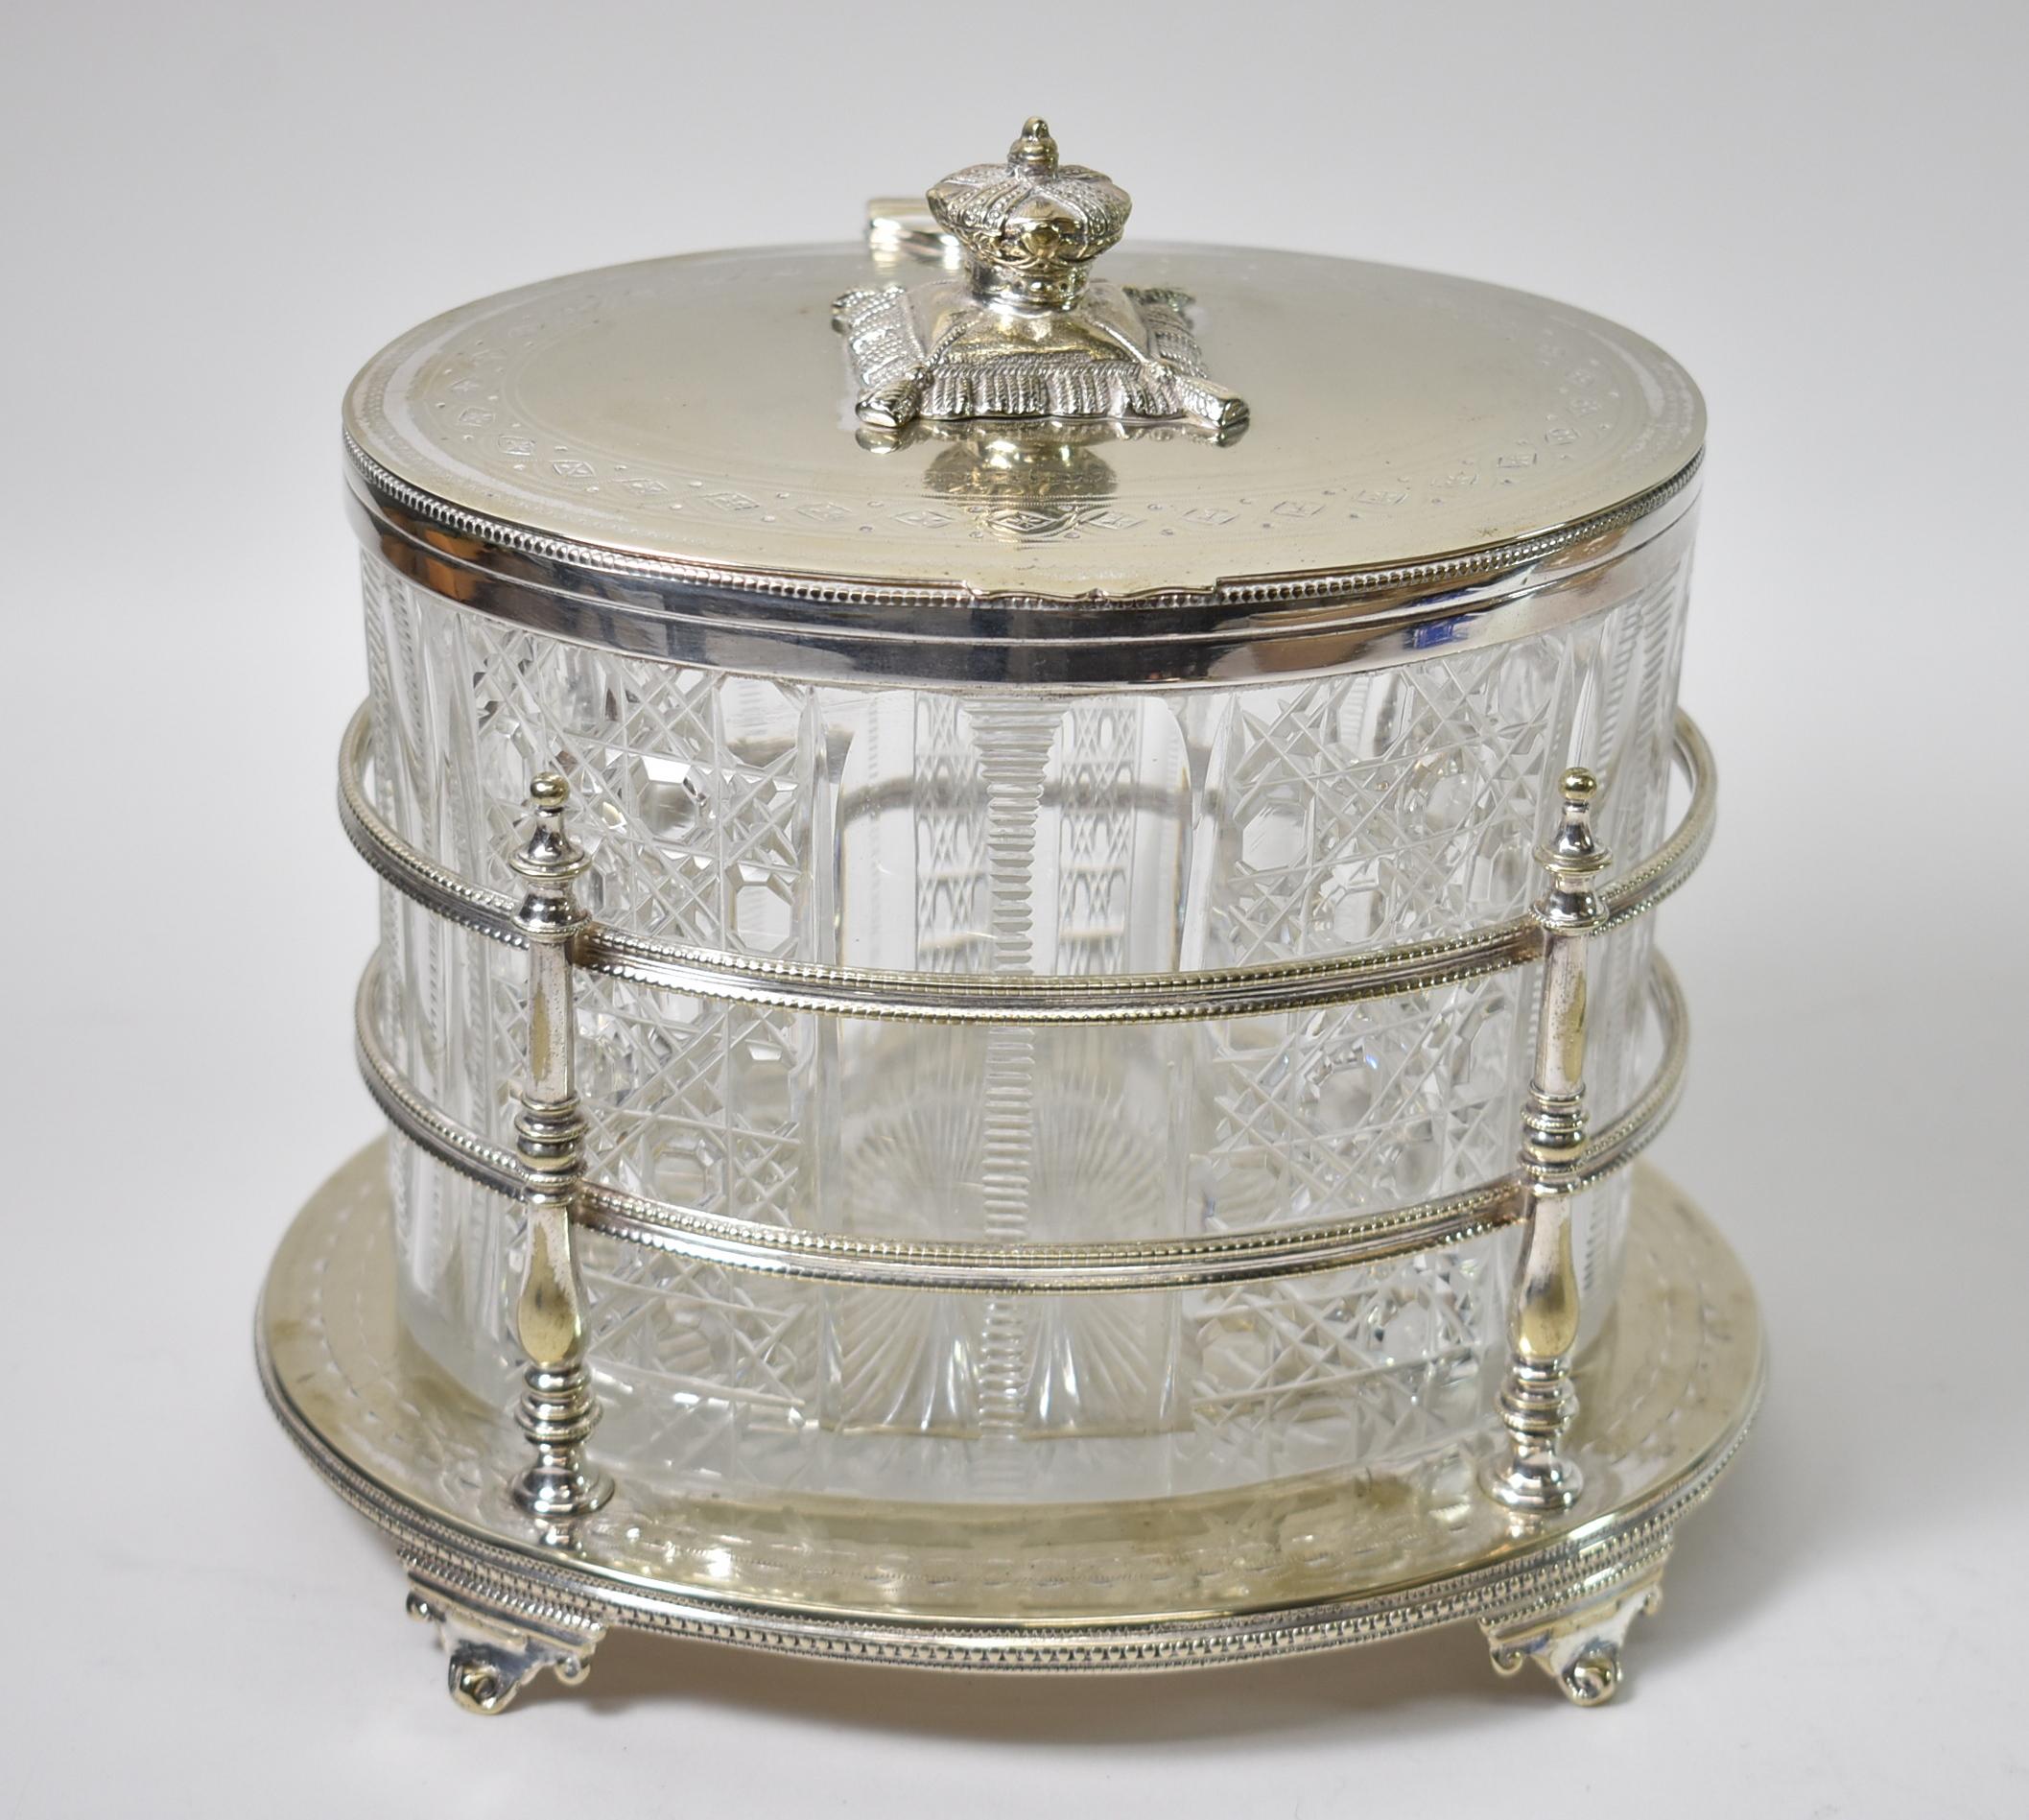 Antique hallmarked Sheffield silver and cut glass biscuit box/jar/barrel. Crown sitting on a pillow on the lid detail. Cut glass insert. Very nice condition. Dimensions: 6.75